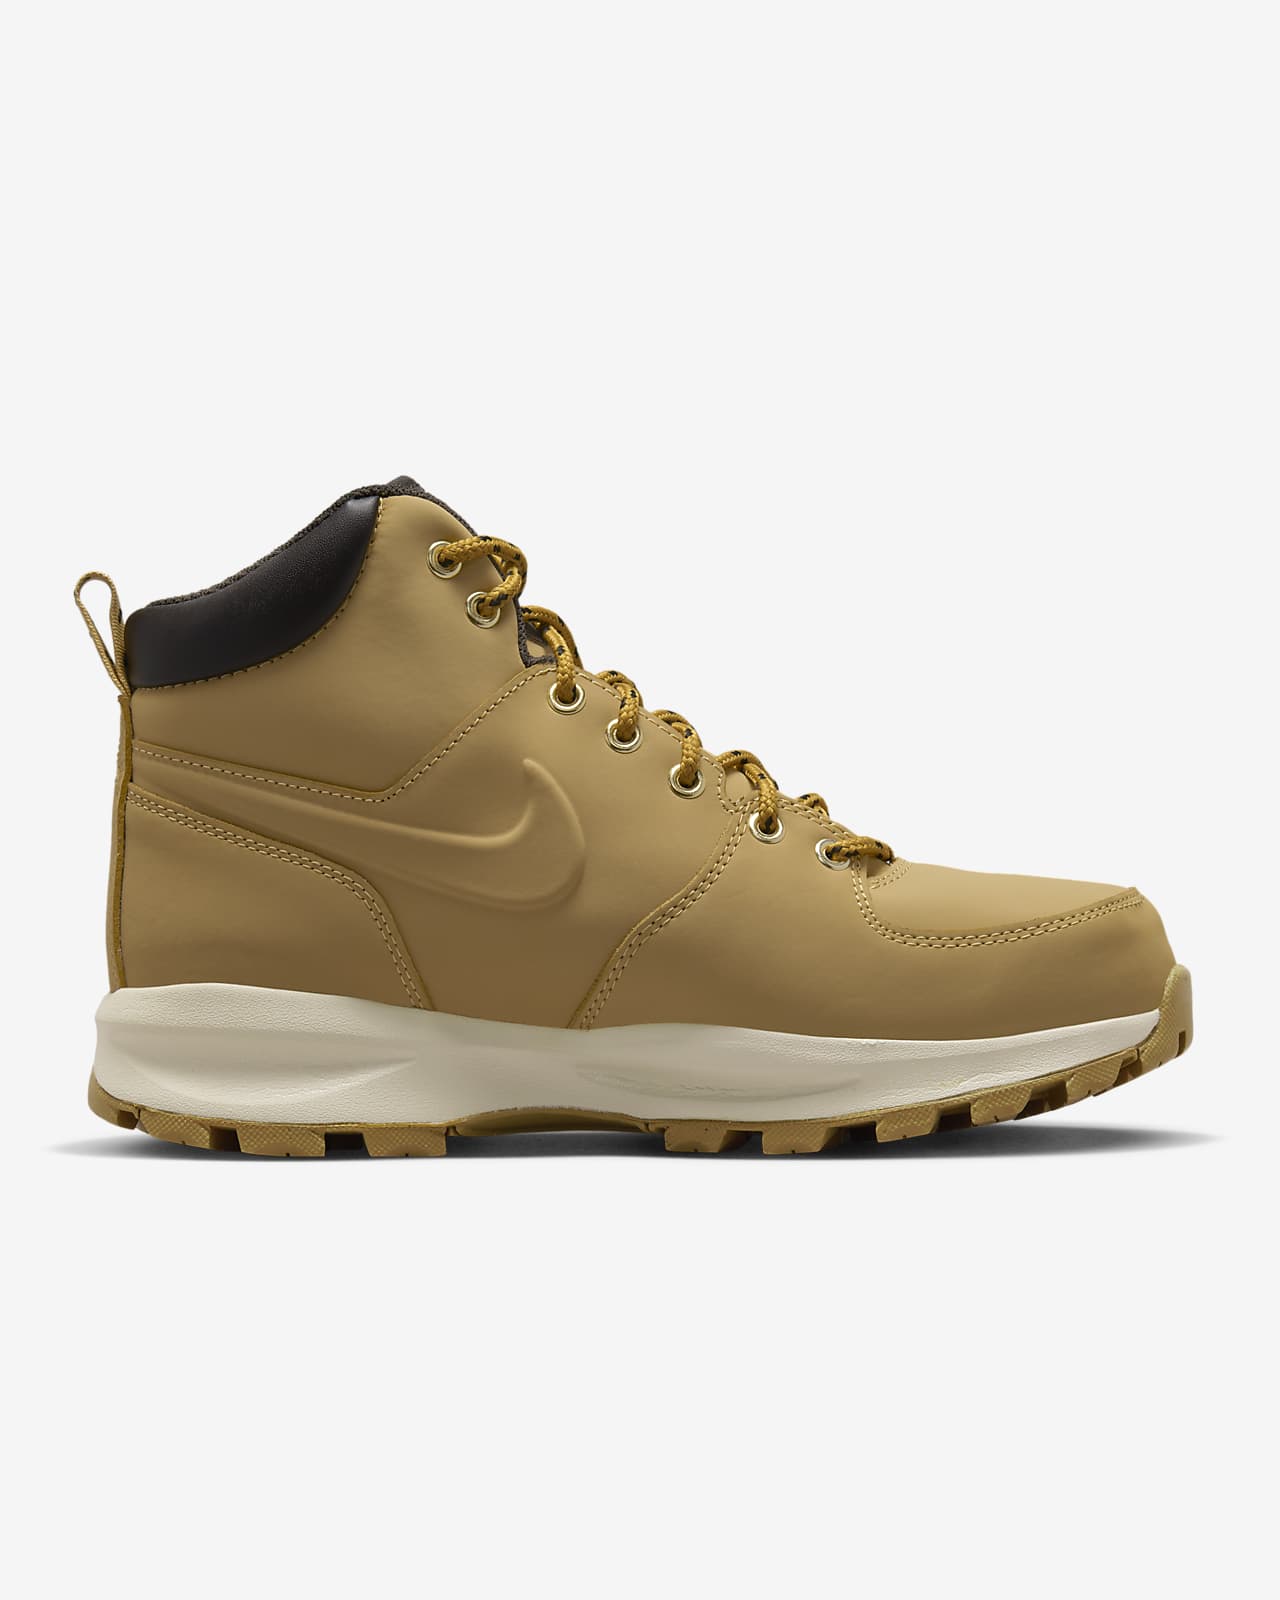 Nike Manoa Leather Men\'s Boots.